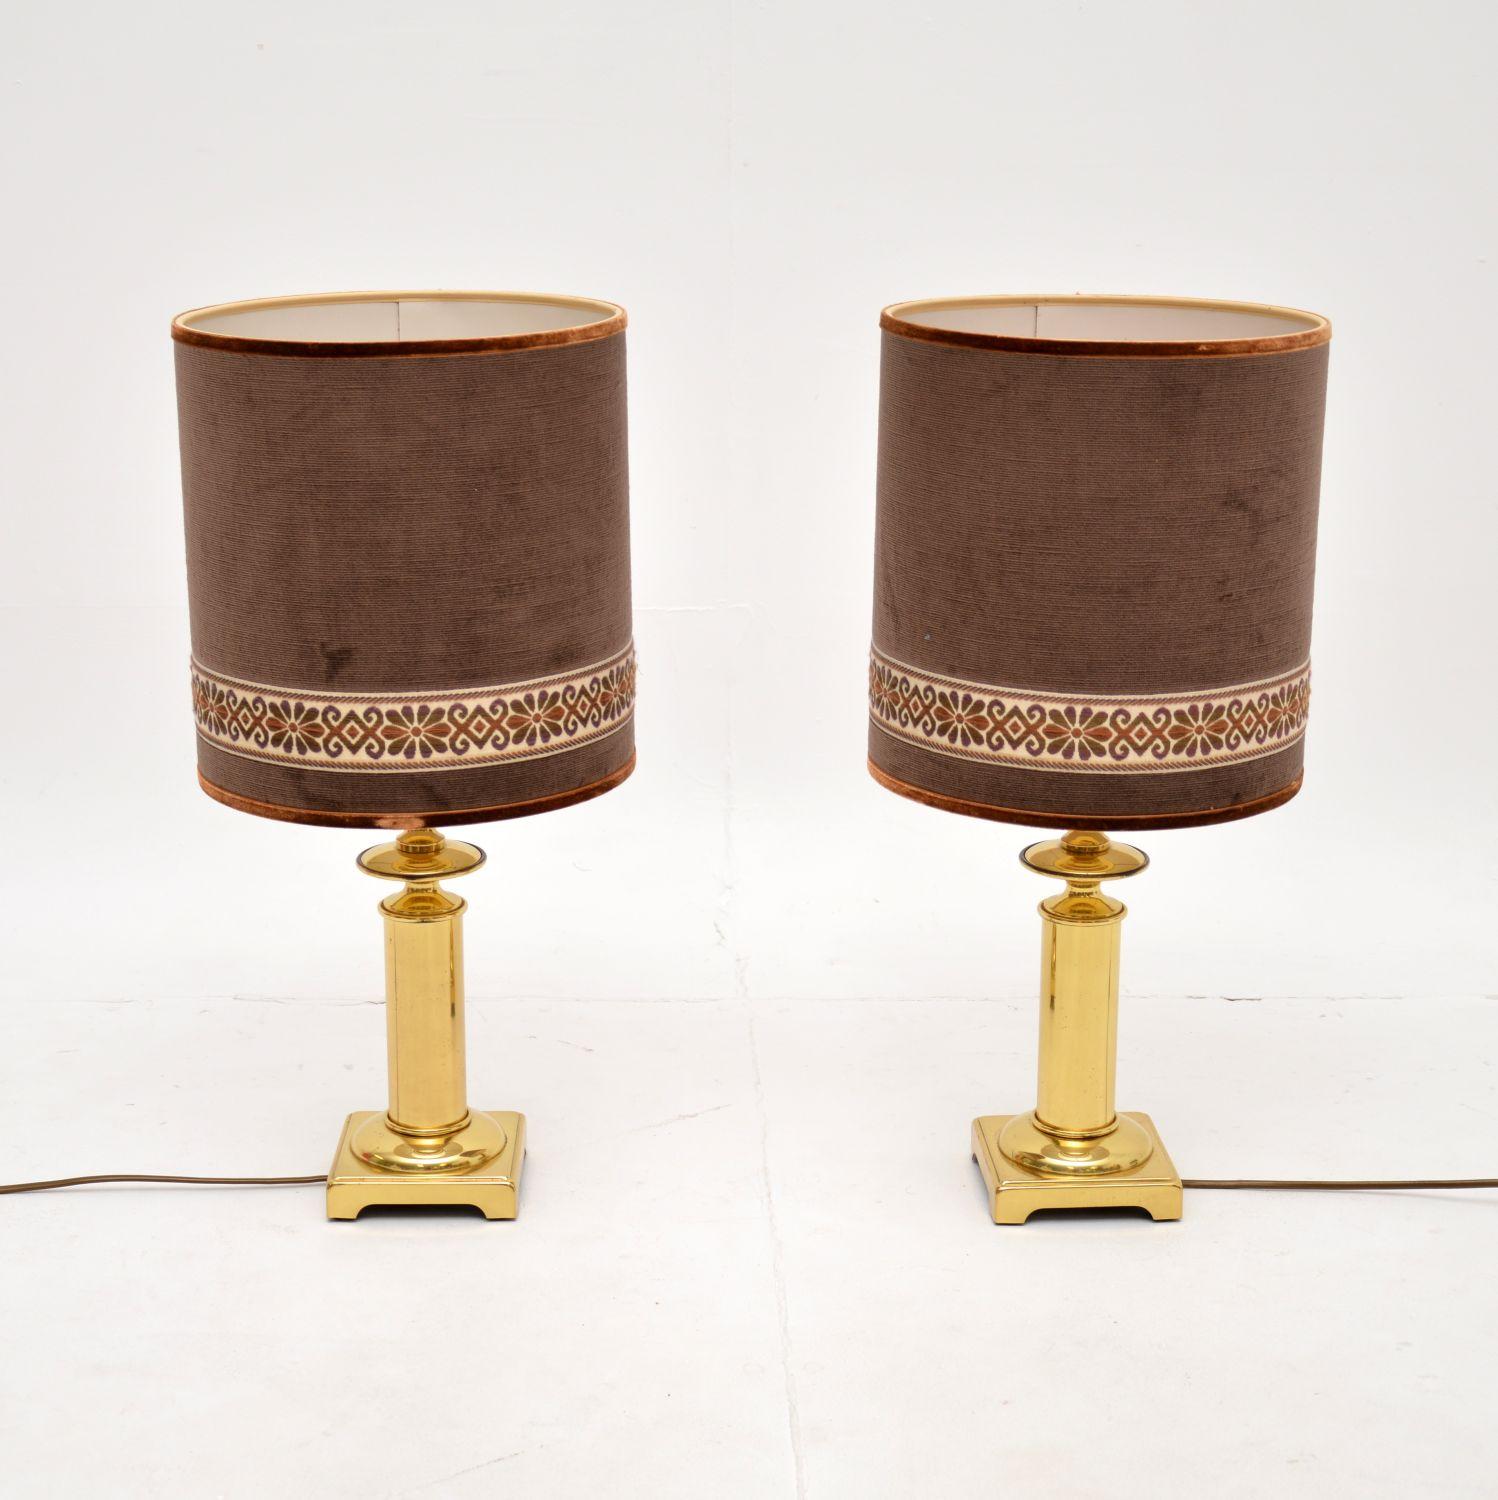 A stylish and extremely well made pair of vintage brass table lamps with velvet shades. They were made in France, they date from around the 1970’s.

The quality is outstanding, the solid brass bases are extremely sturdy and well made. They come with